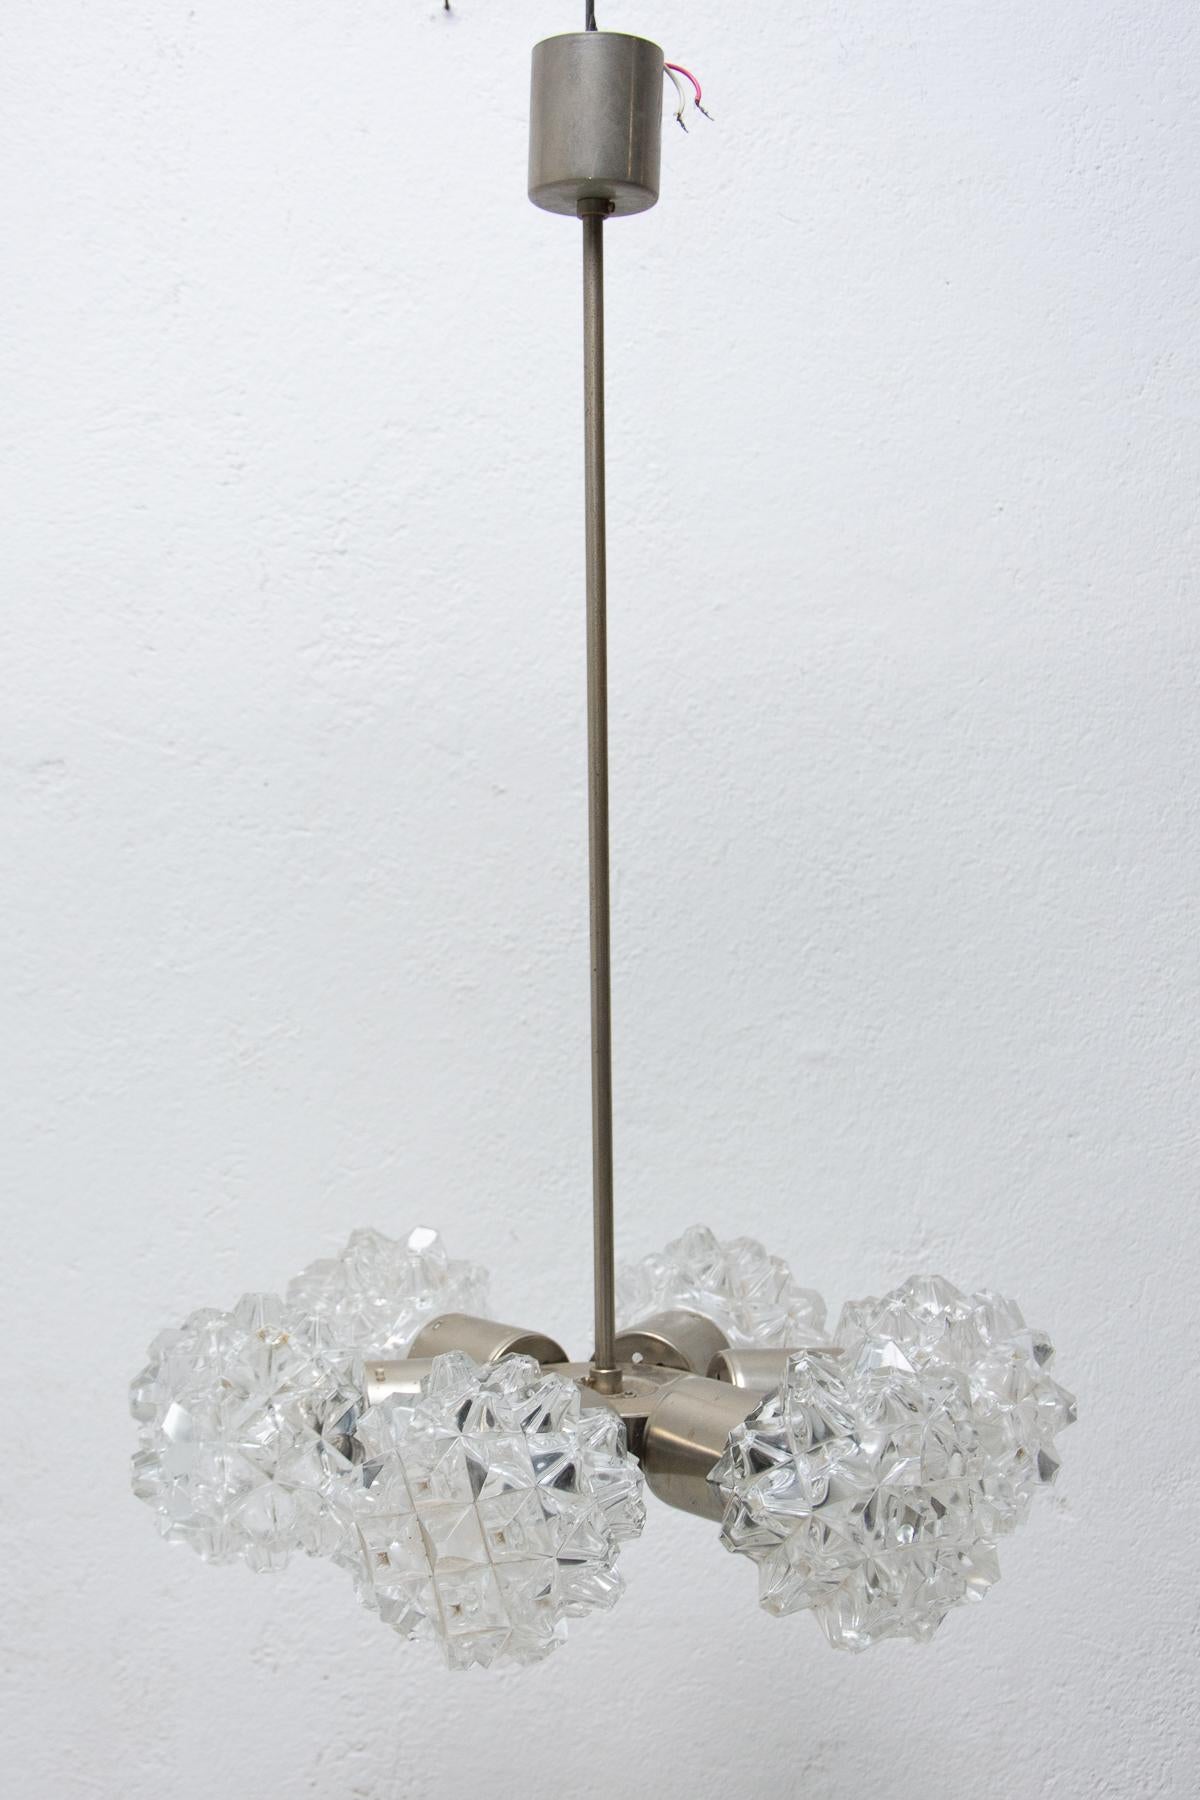 Czechoslovak cut glass and chrome plated ceiling light, made in the former Czechoslovakia for Kamenický Šenov in the 1970´s. It features chrome steel structure and six cut glass lampshades. The pendant is in very good condition. Newly wired.

E27